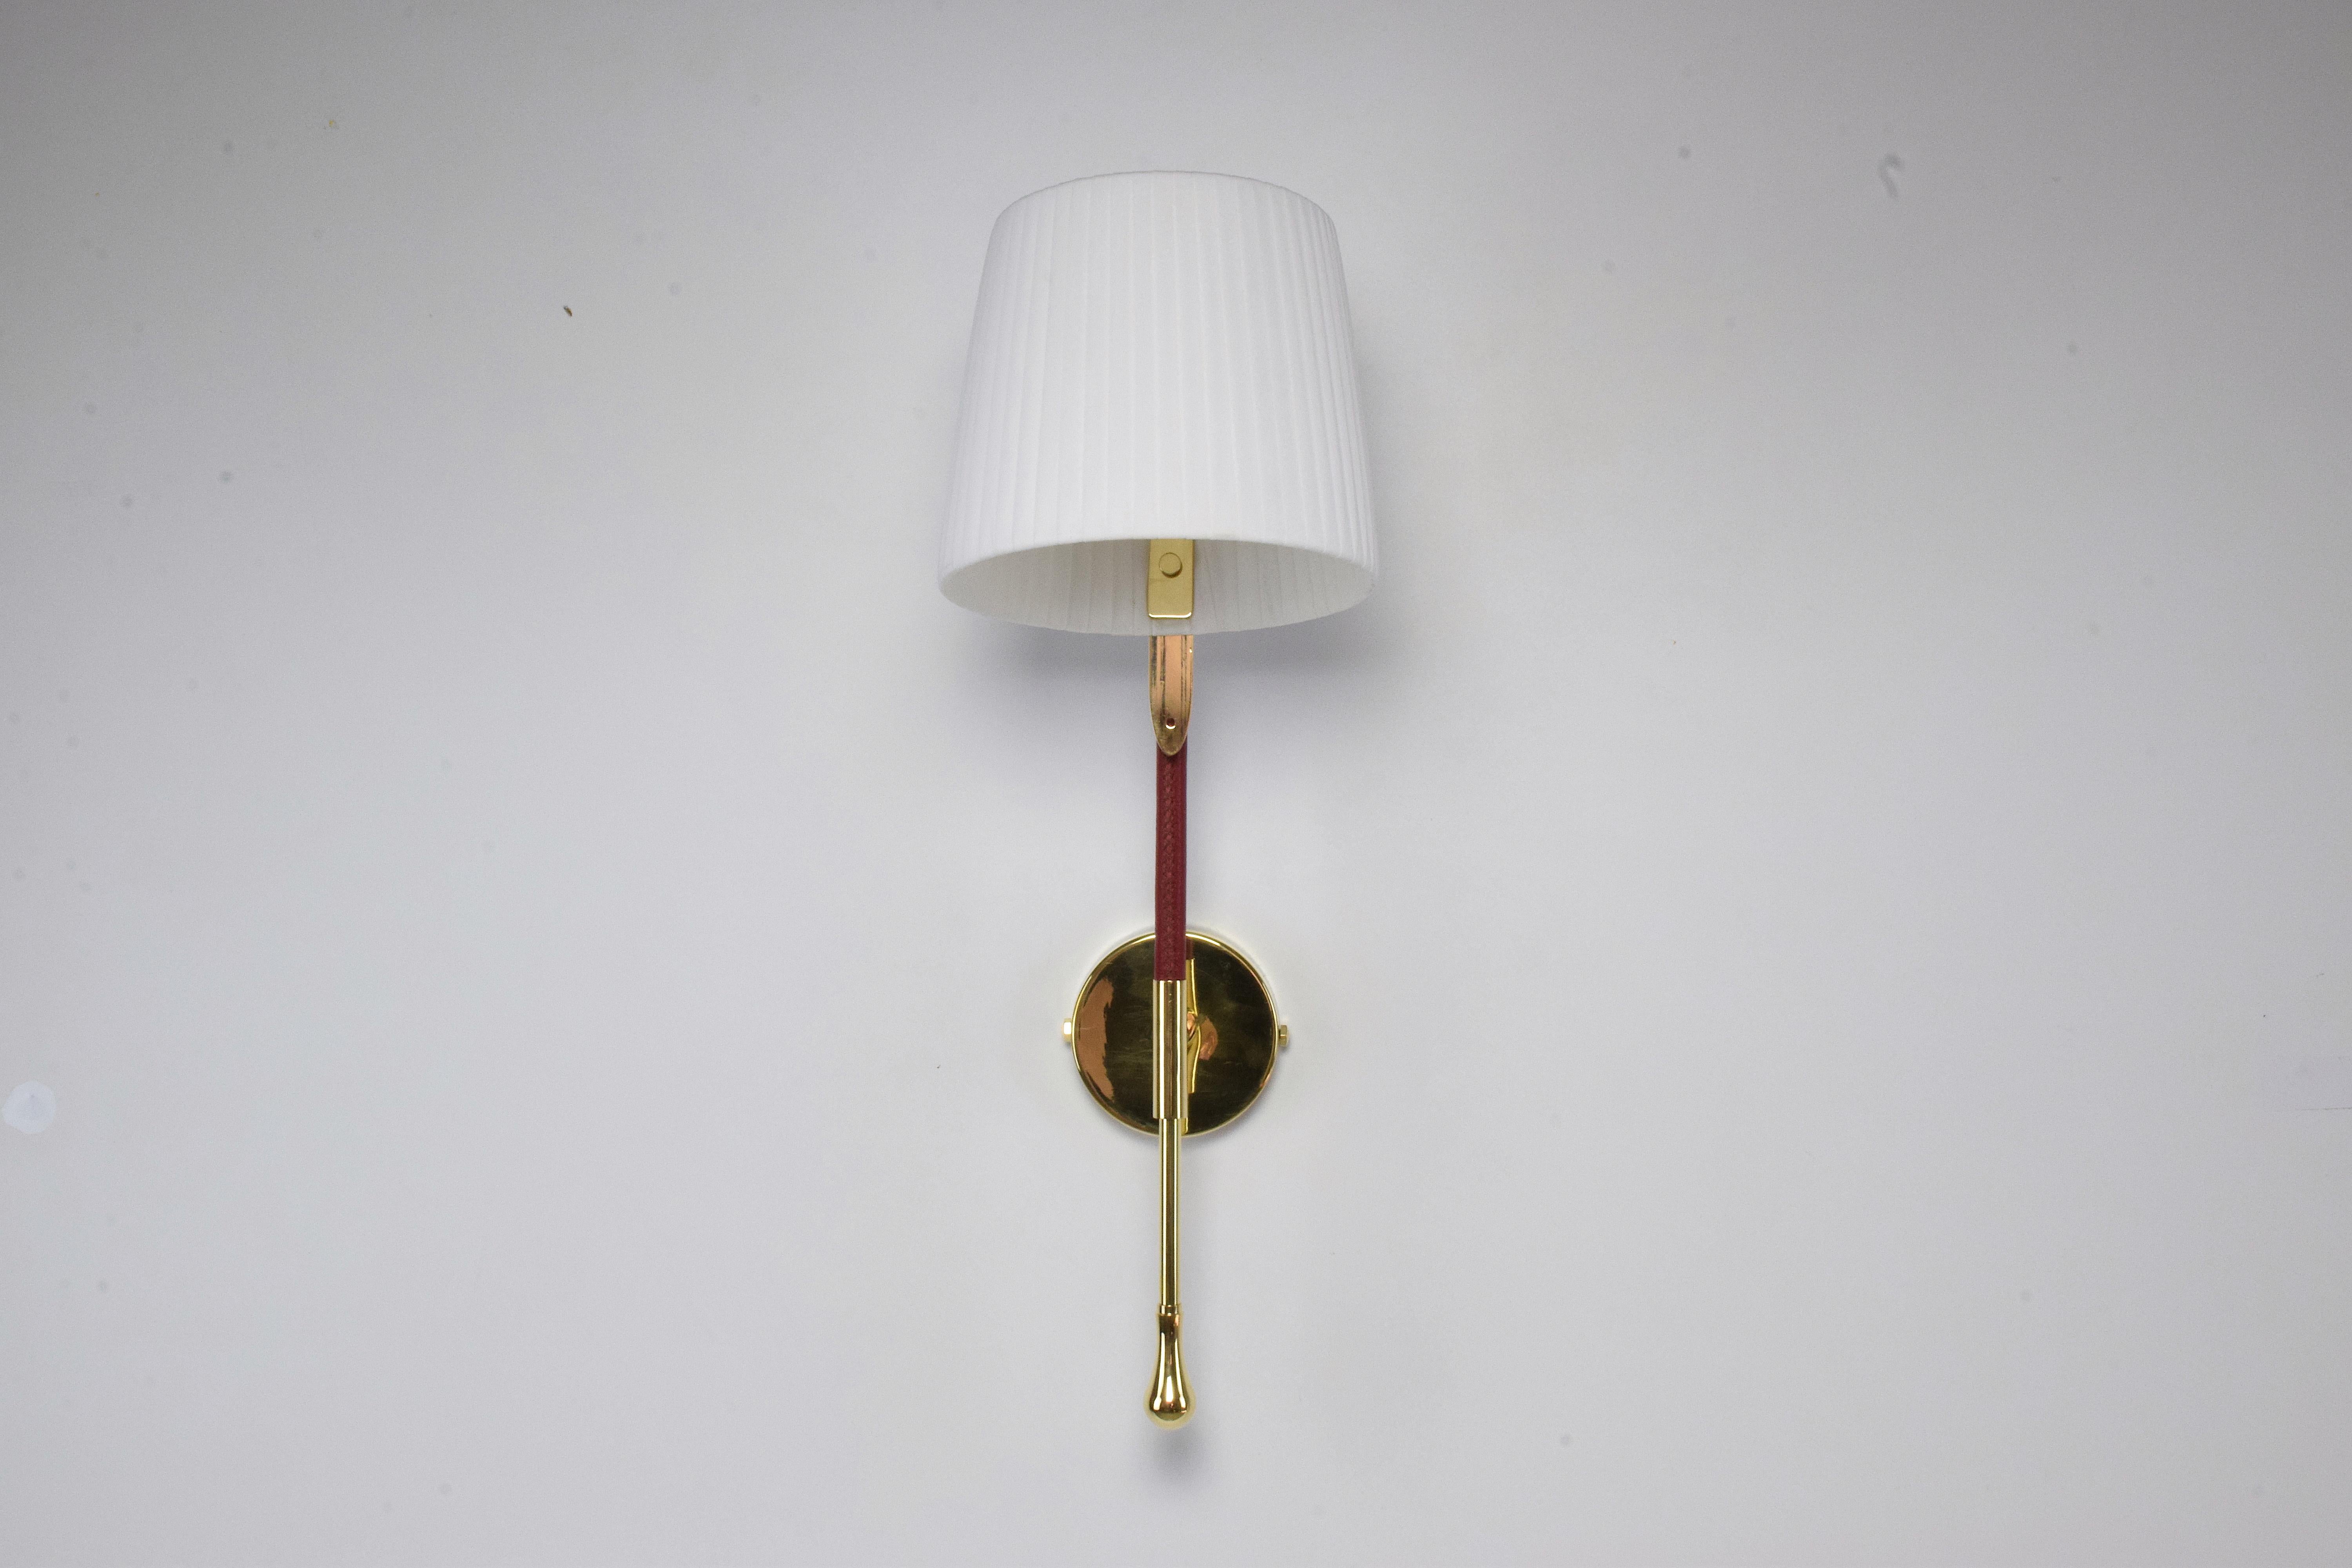 21st century contemporary handcrafted wall lamp fixture or sconce, made of a gold polished brass structure adorned with a brown sheathed leather detail hand sewn by artisan saddle markers, a white soft fabric pleated shade with 90° rotation which is